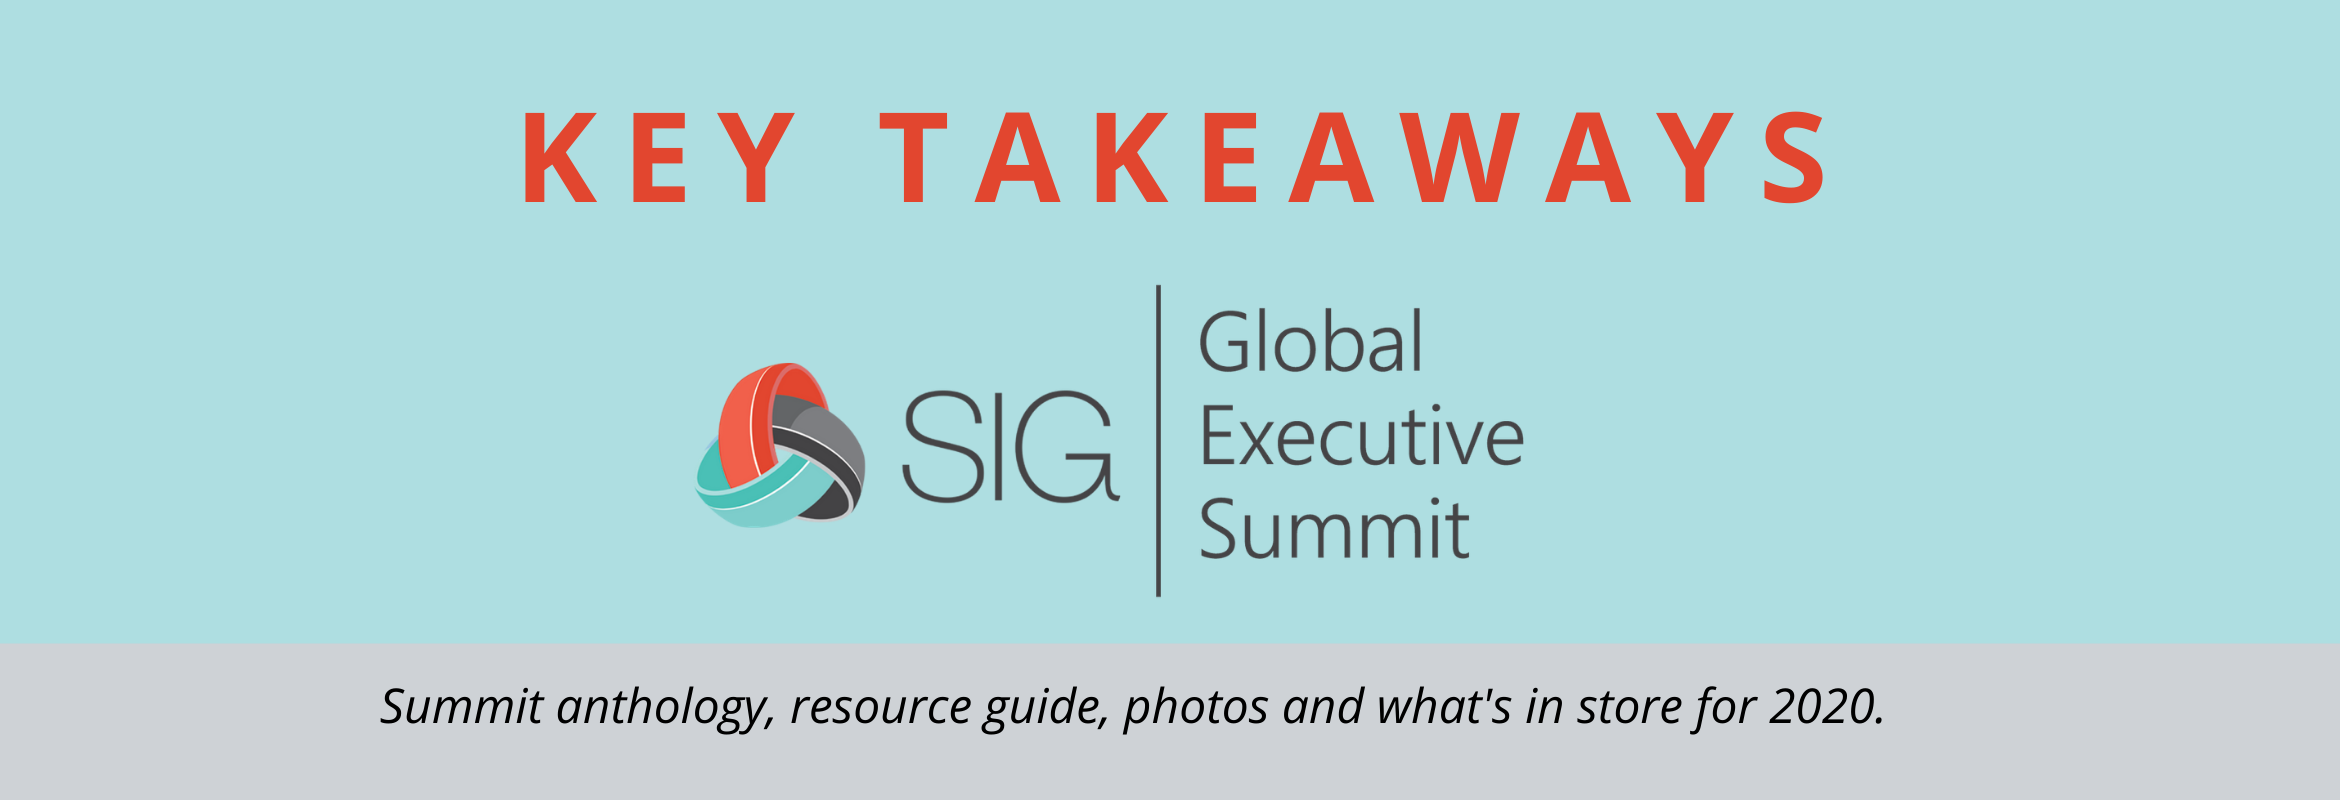 Key takeaways and resources for sourcing and procurement professionals from SIG's Fall Global Executive Summit